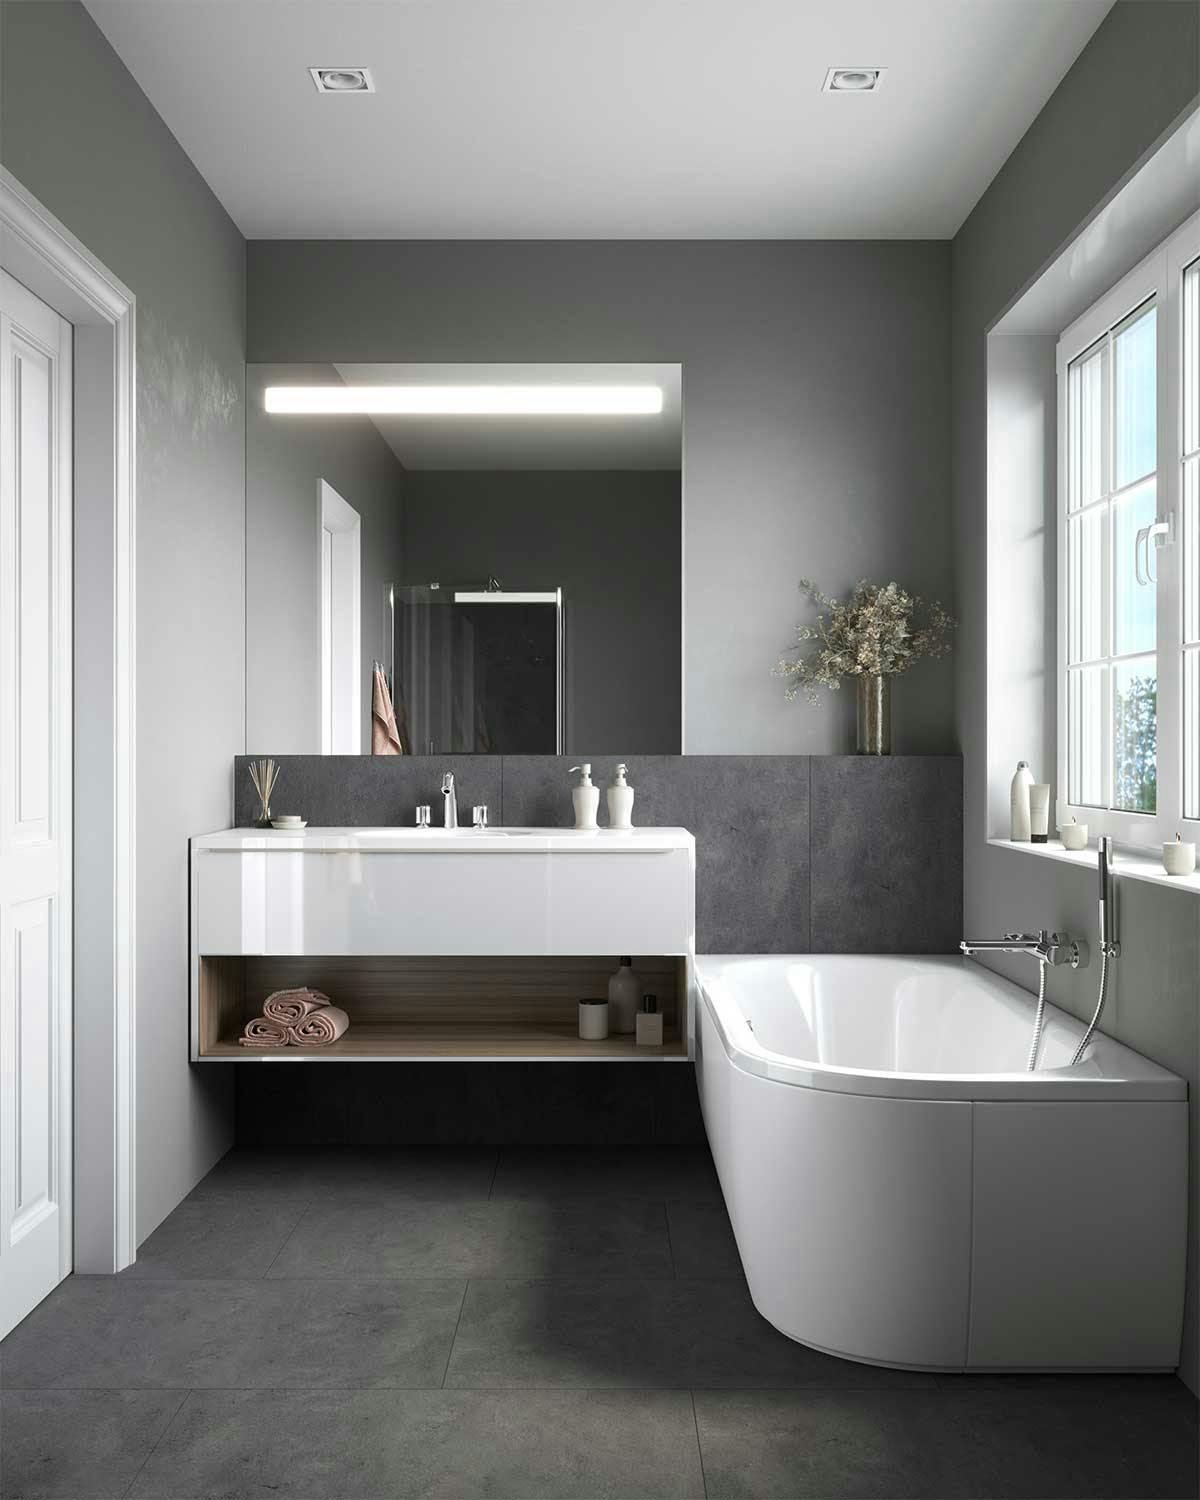 3D Interior Visualization with the design concept of a bathroom in a private double house in Haar.